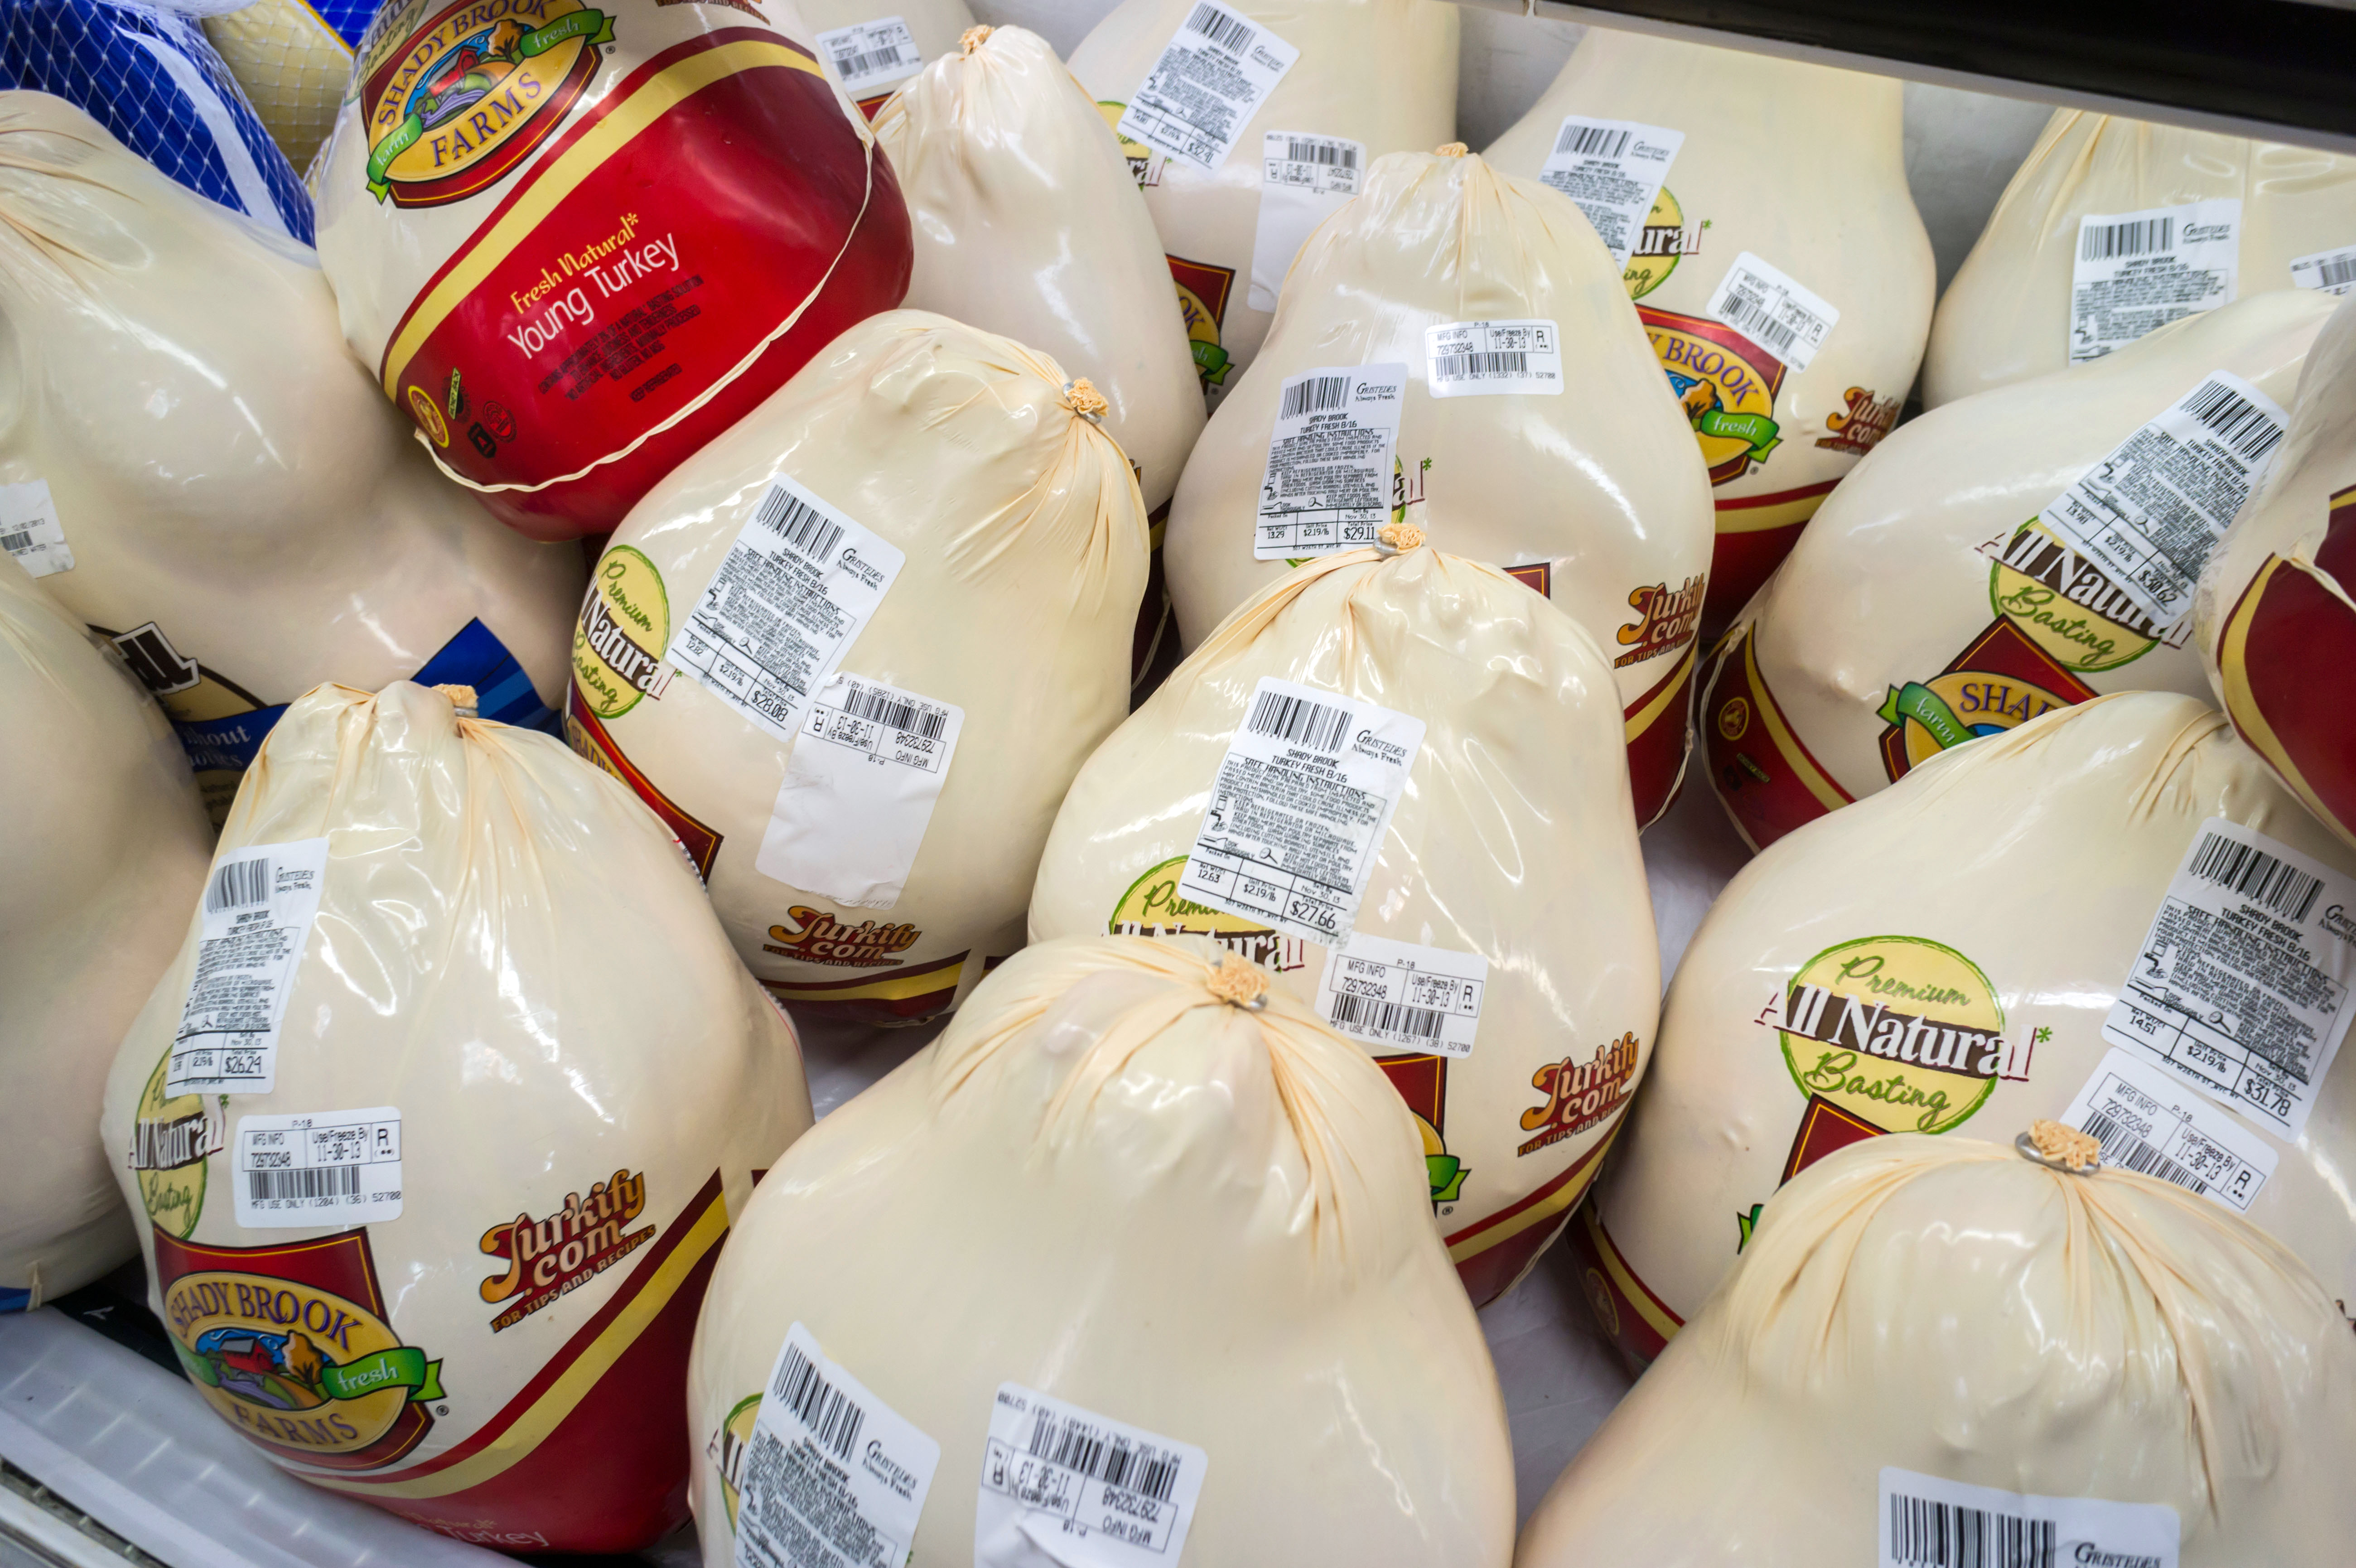 Cheap Turkey Deals Widely Available for Thanksgiving, Despite 'Shortage